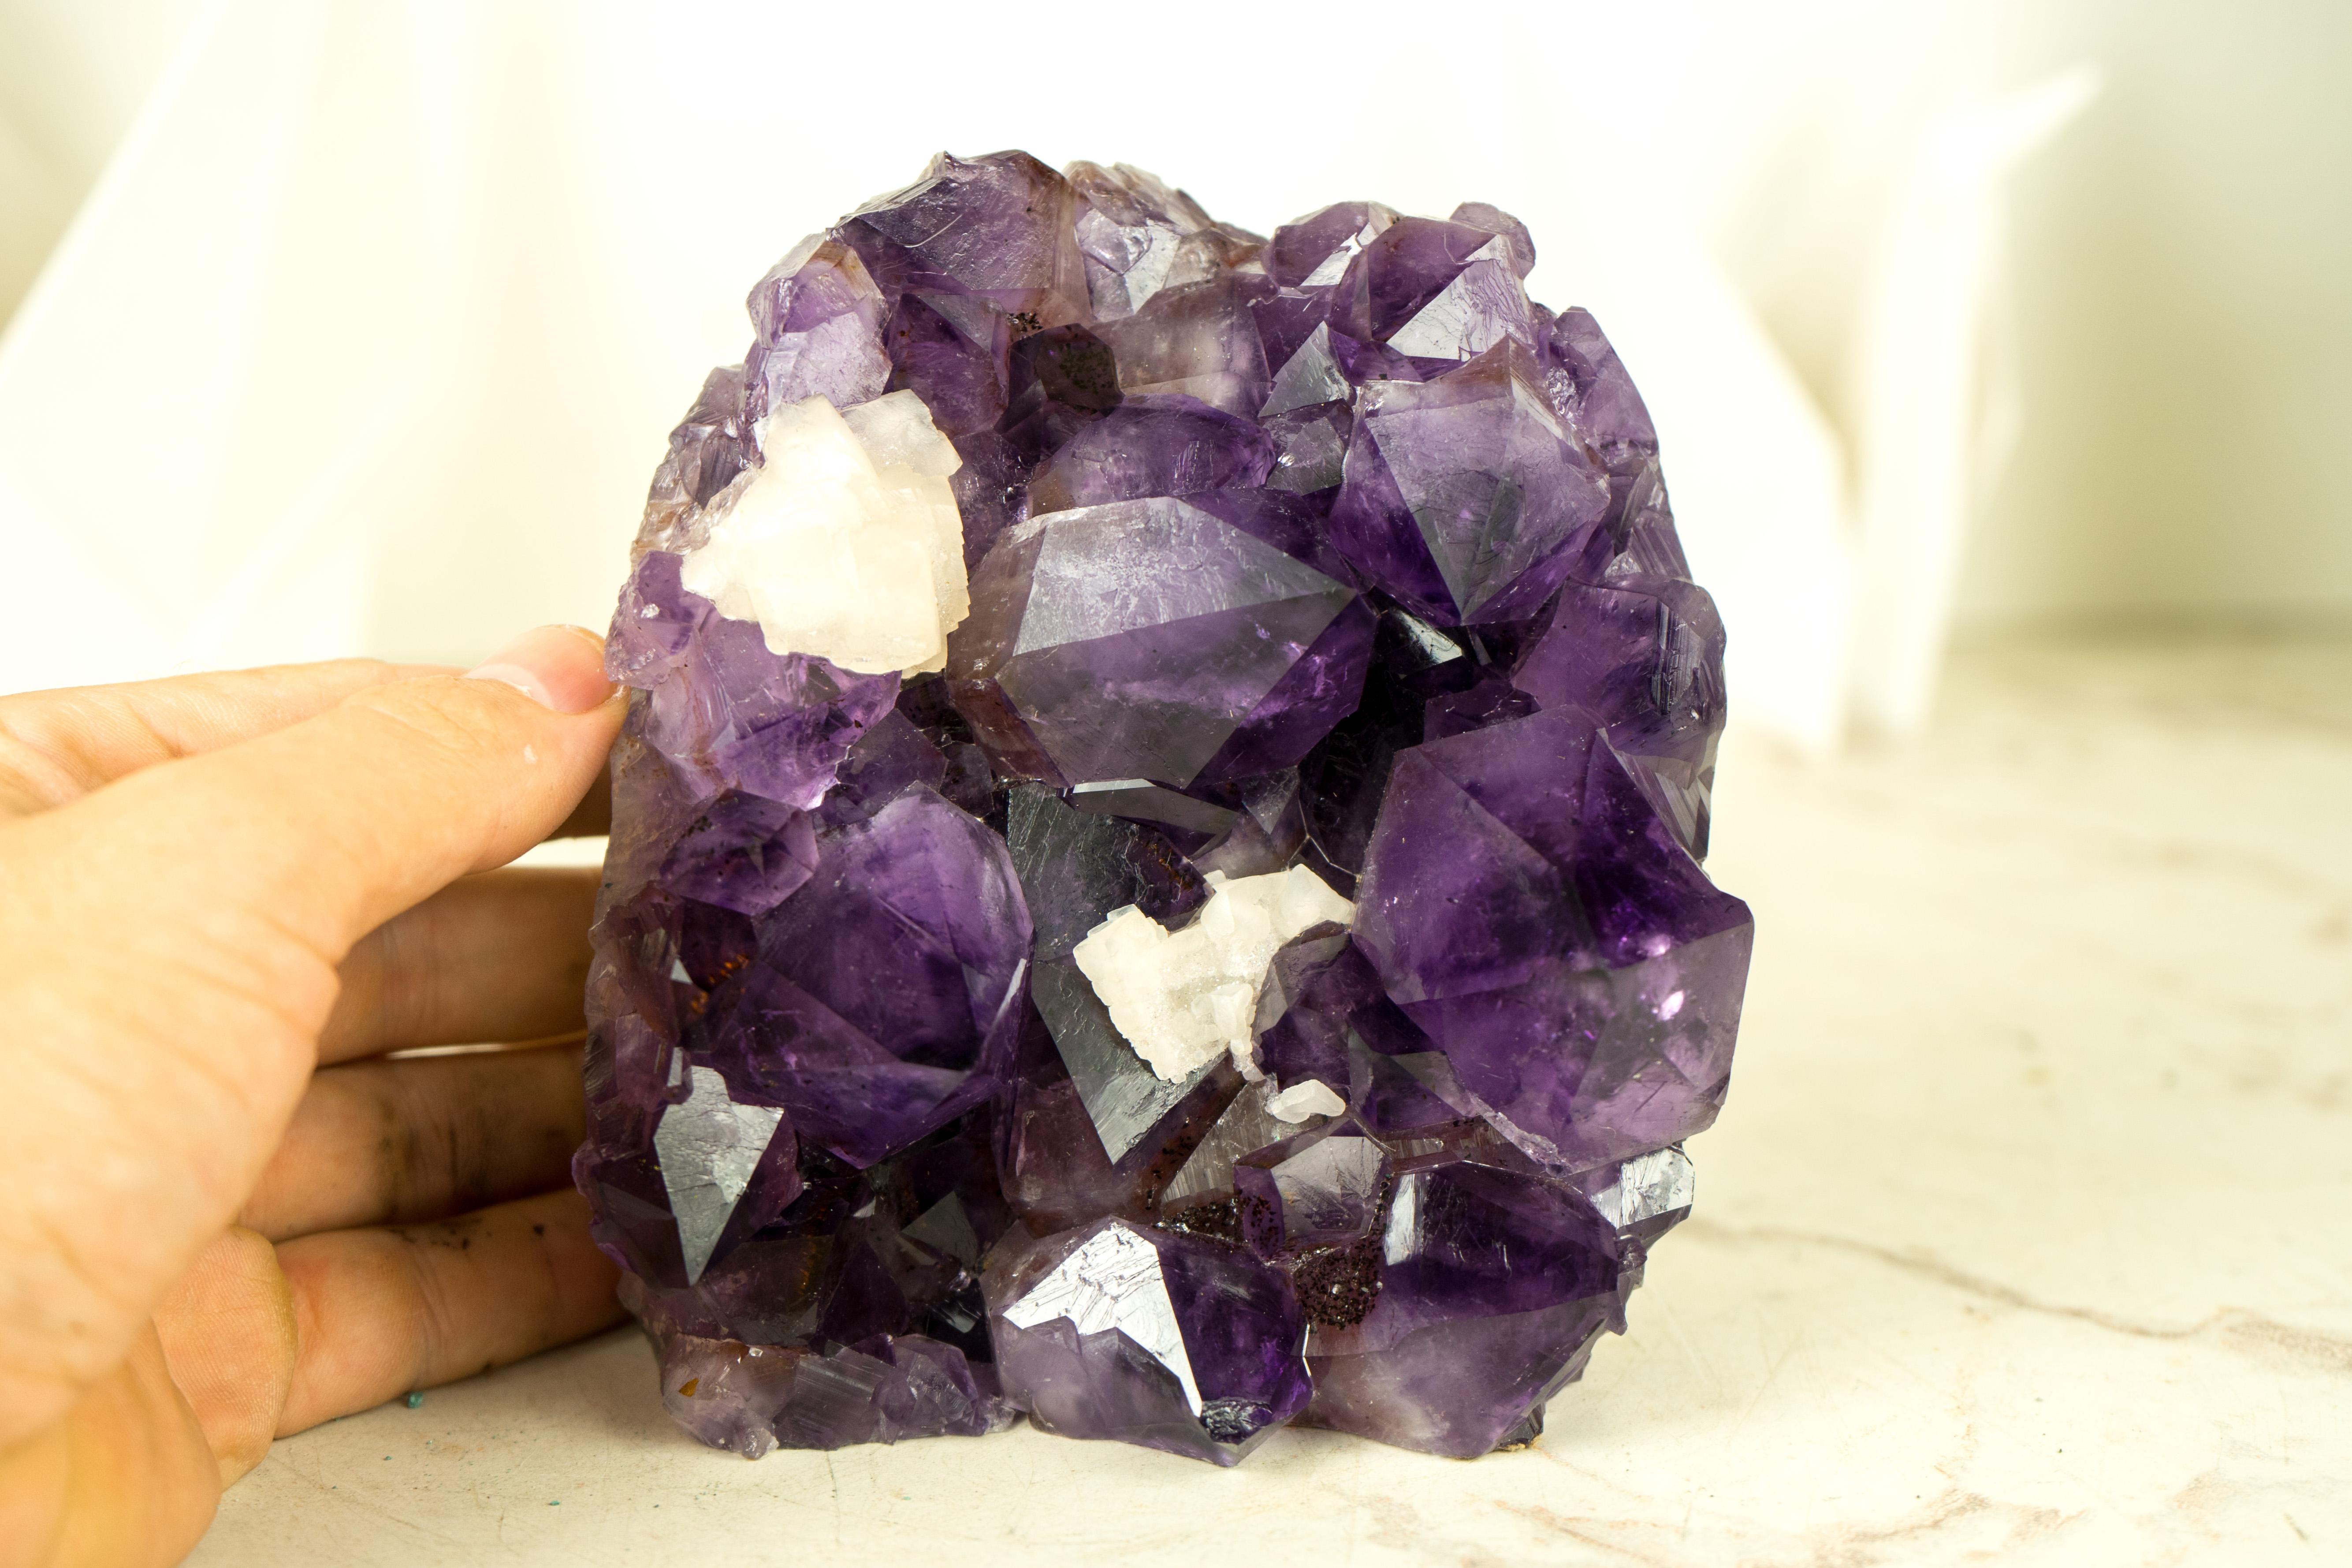 High-Grade Amethyst Geode Cluster with sparkly, Large AAA-Grade Amethyst Points

▫️ Description

An extraordinary Amethyst Cluster from Brazil that possesses world-class characteristics. Its deep, rich purple tone brings beauty and elegance, making